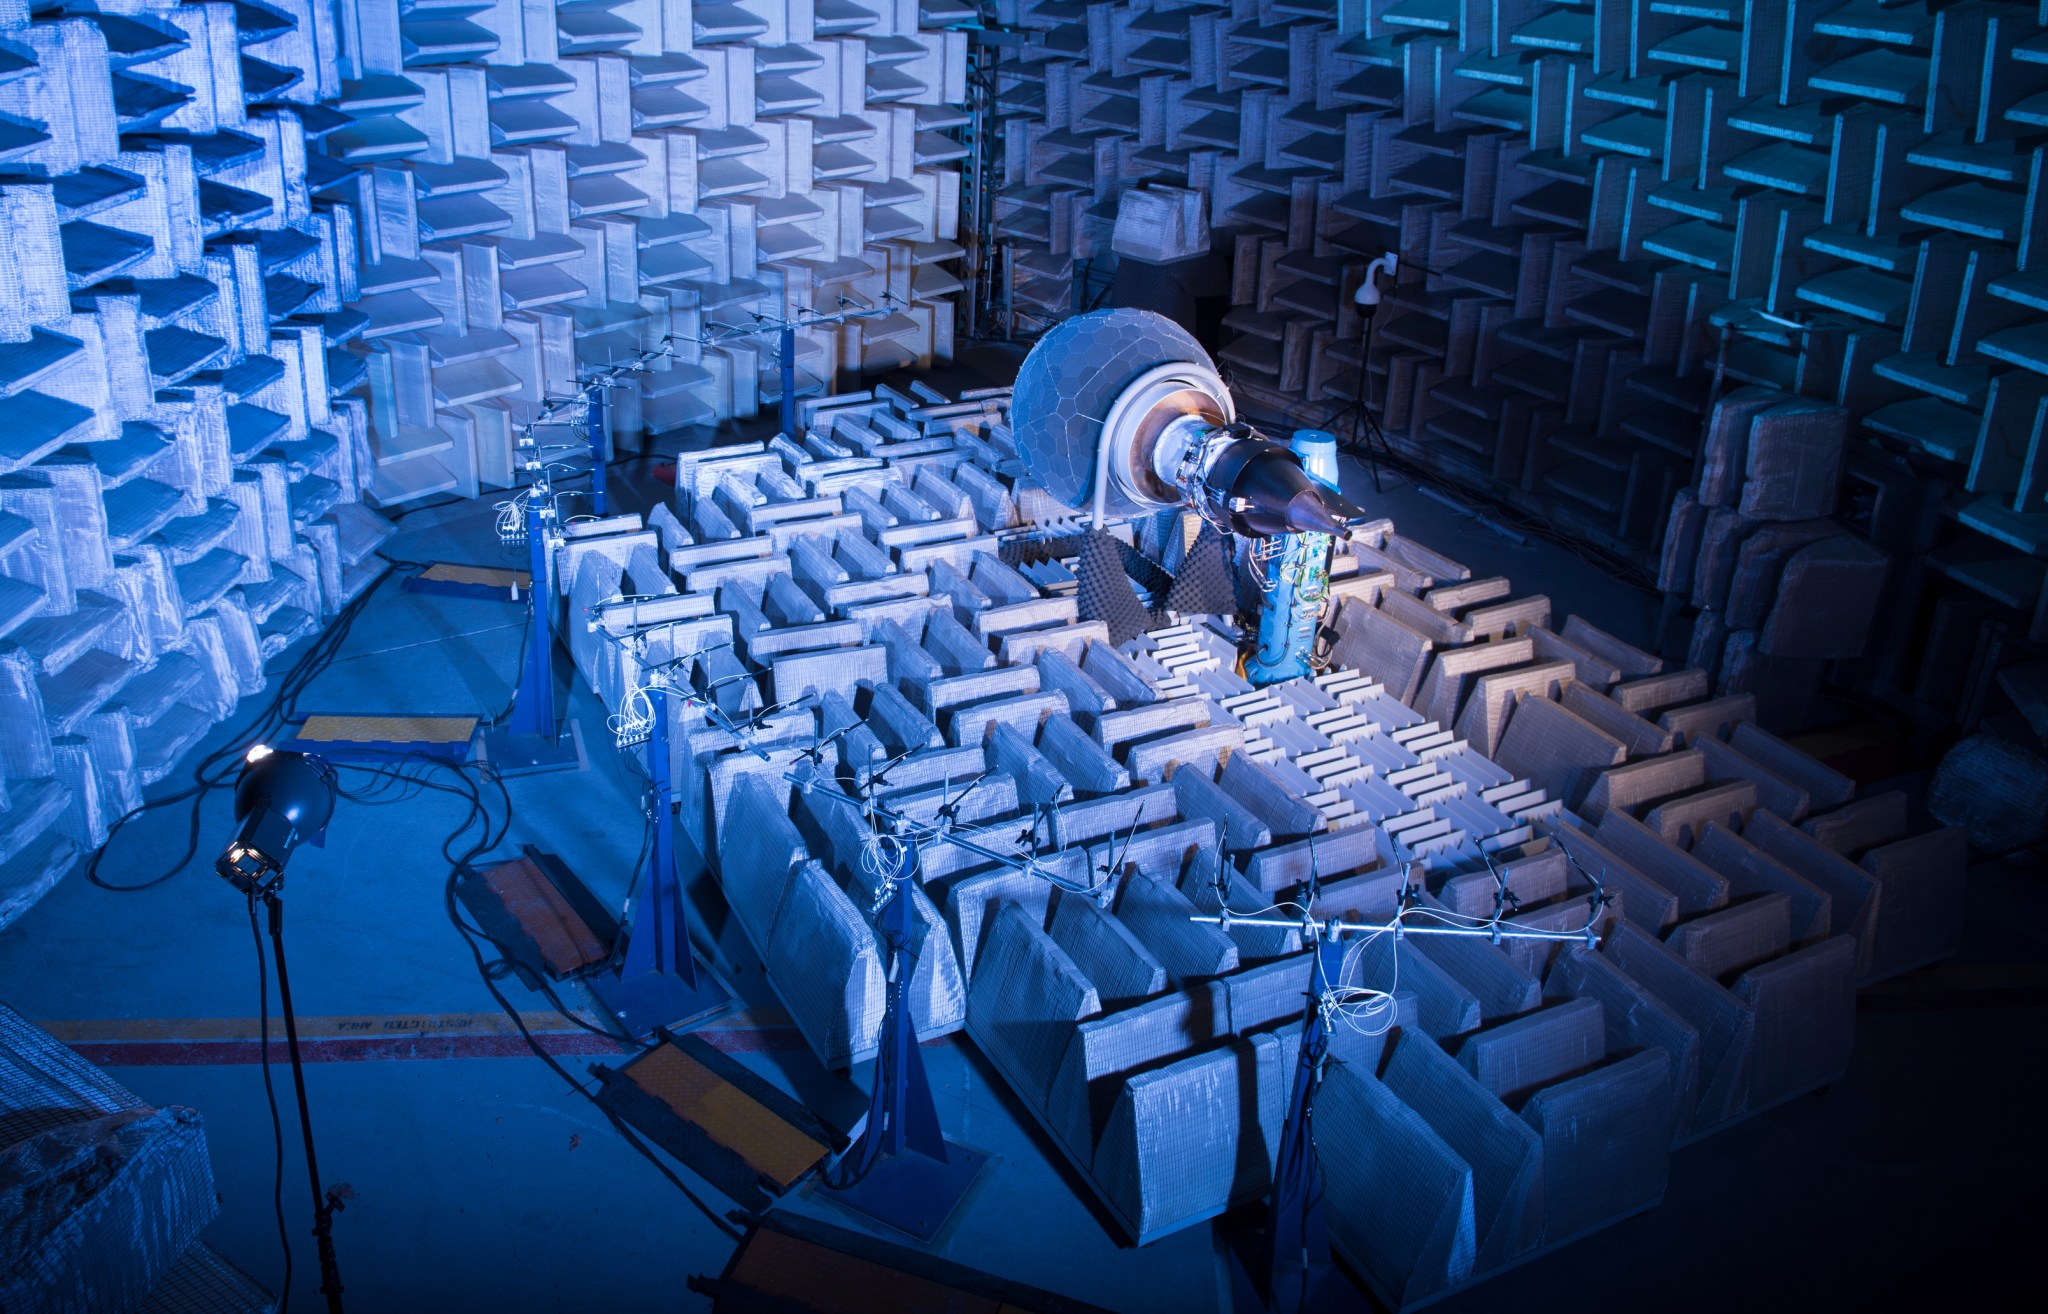 The DGEN AeroPropulsion Research Turbofan test rig is illuminated by lights inside of NASA Glenn’s Aero-Acoustic Propulsion Laboratory. The walls of the facility, covered in wedges, glow blue in the background.